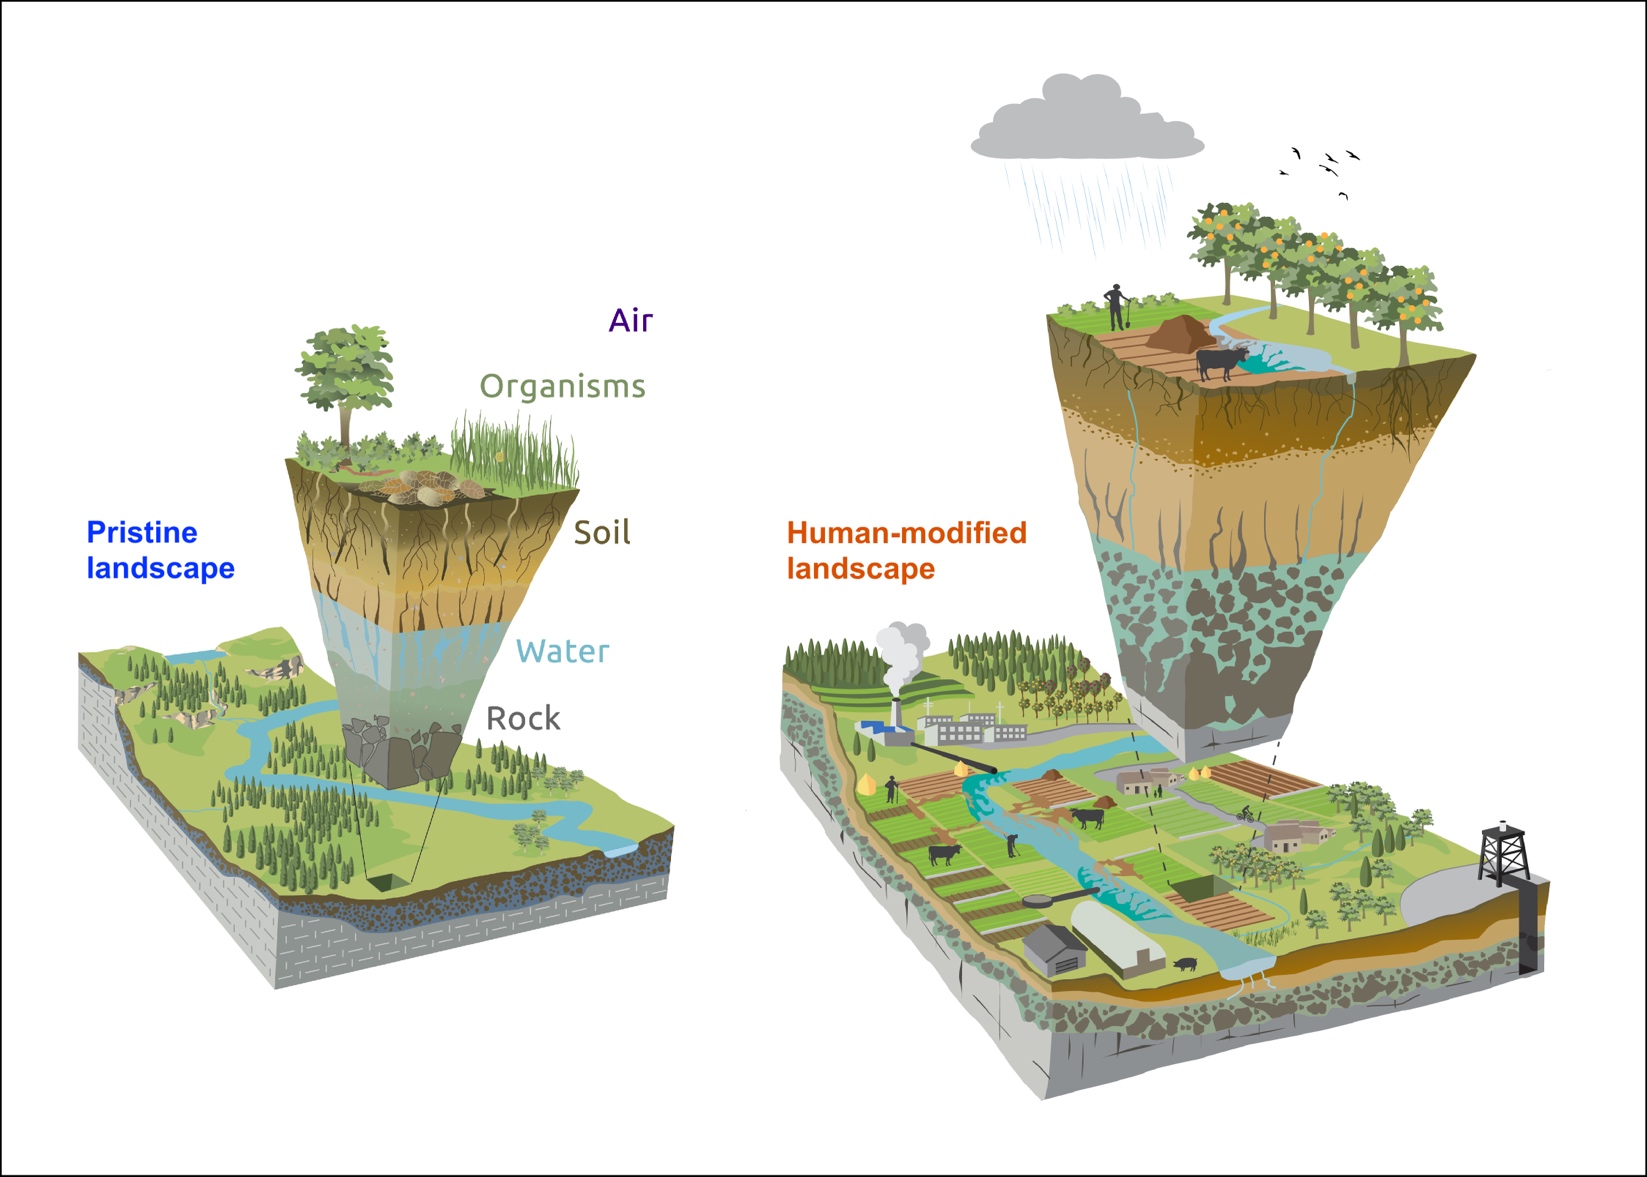 A picture picture showing the difference between the ‘pristine’ landscape that made up the earlier, widely-adopted diagram on the left and the updated diagram on the right.